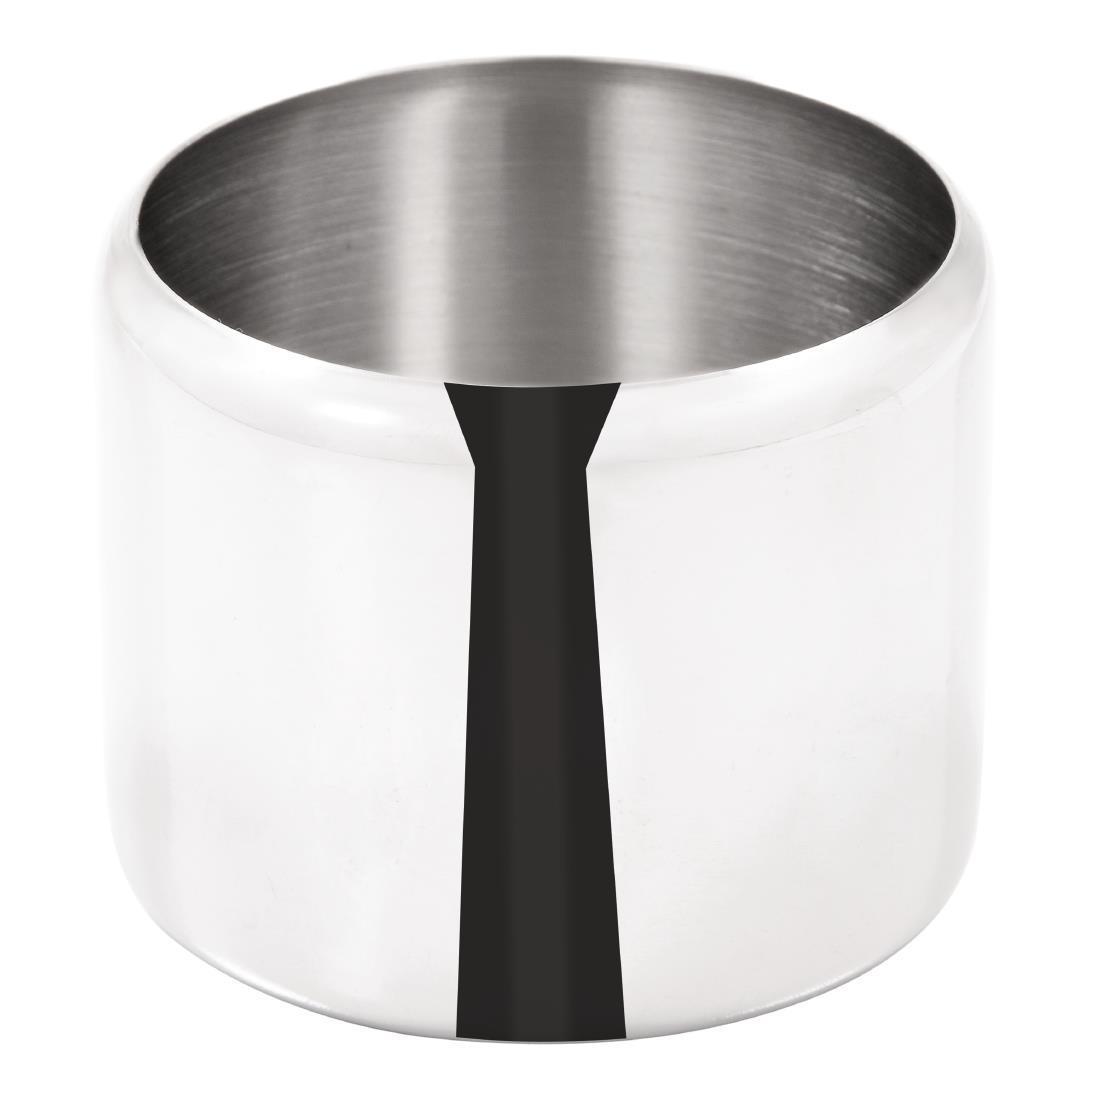 Olympia Concorde Stainless Steel Sugar Bowl 67mm - J728  - 2